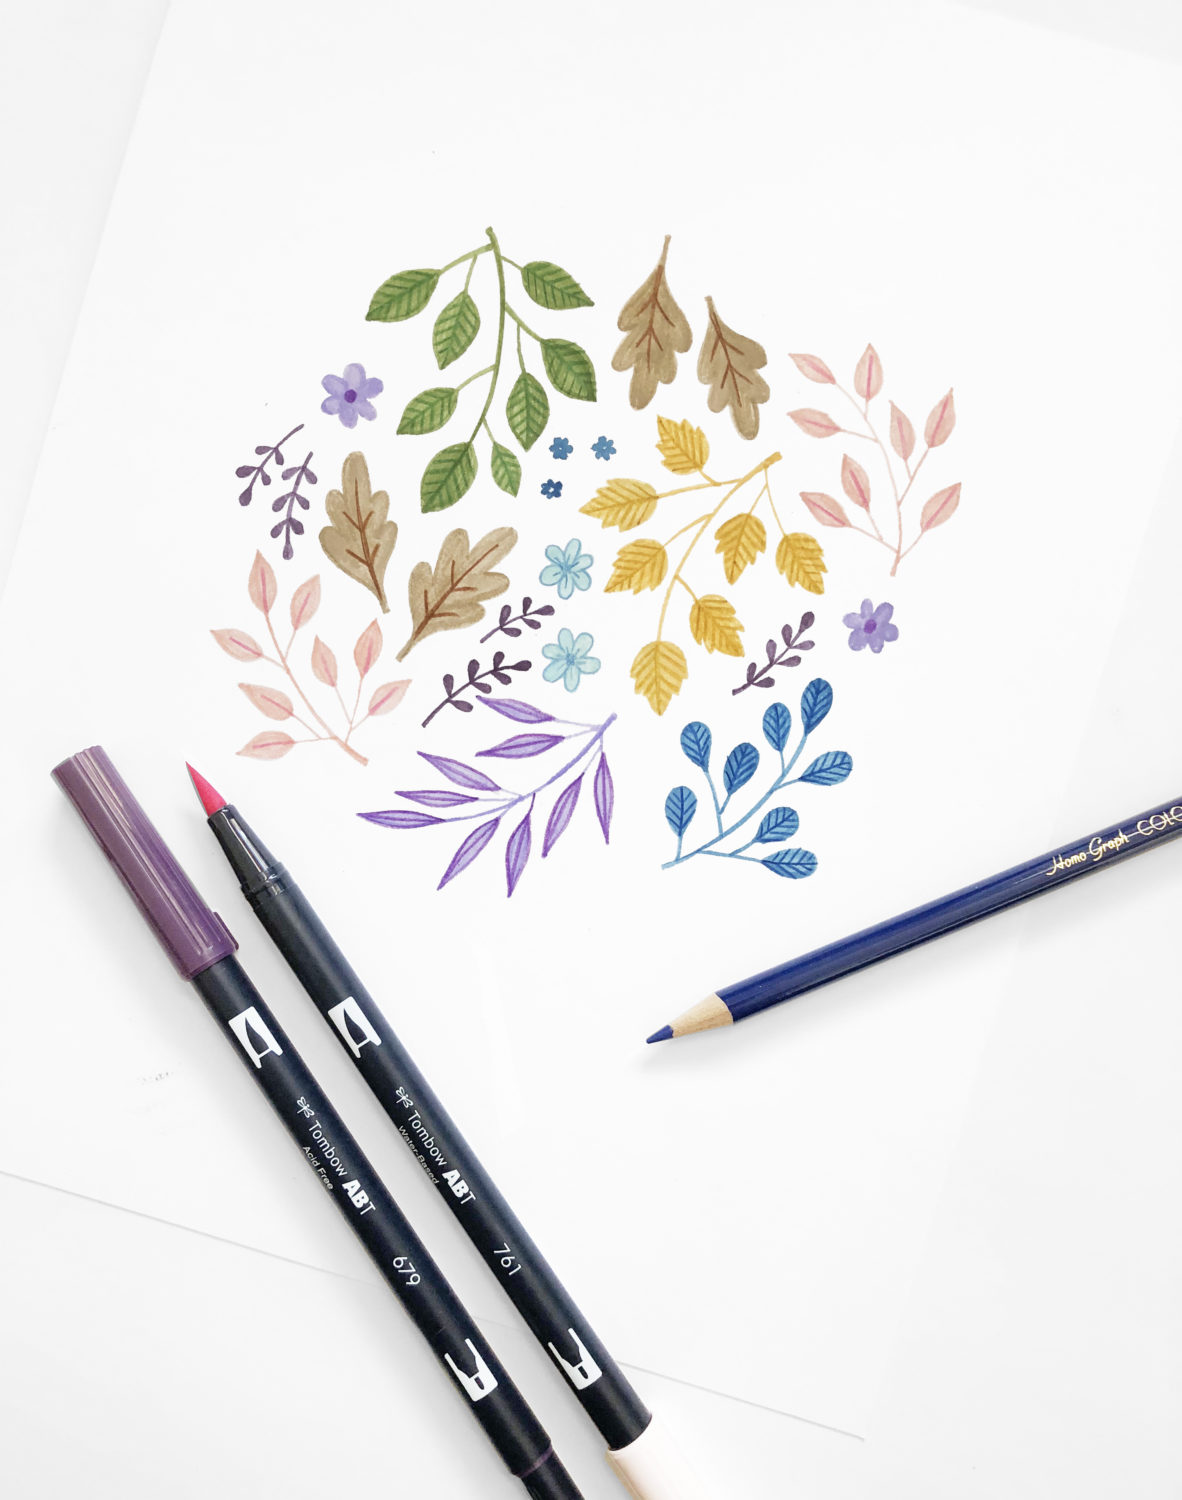 How to Doodle: 6 Plants to Draw! - Tombow USA Blog